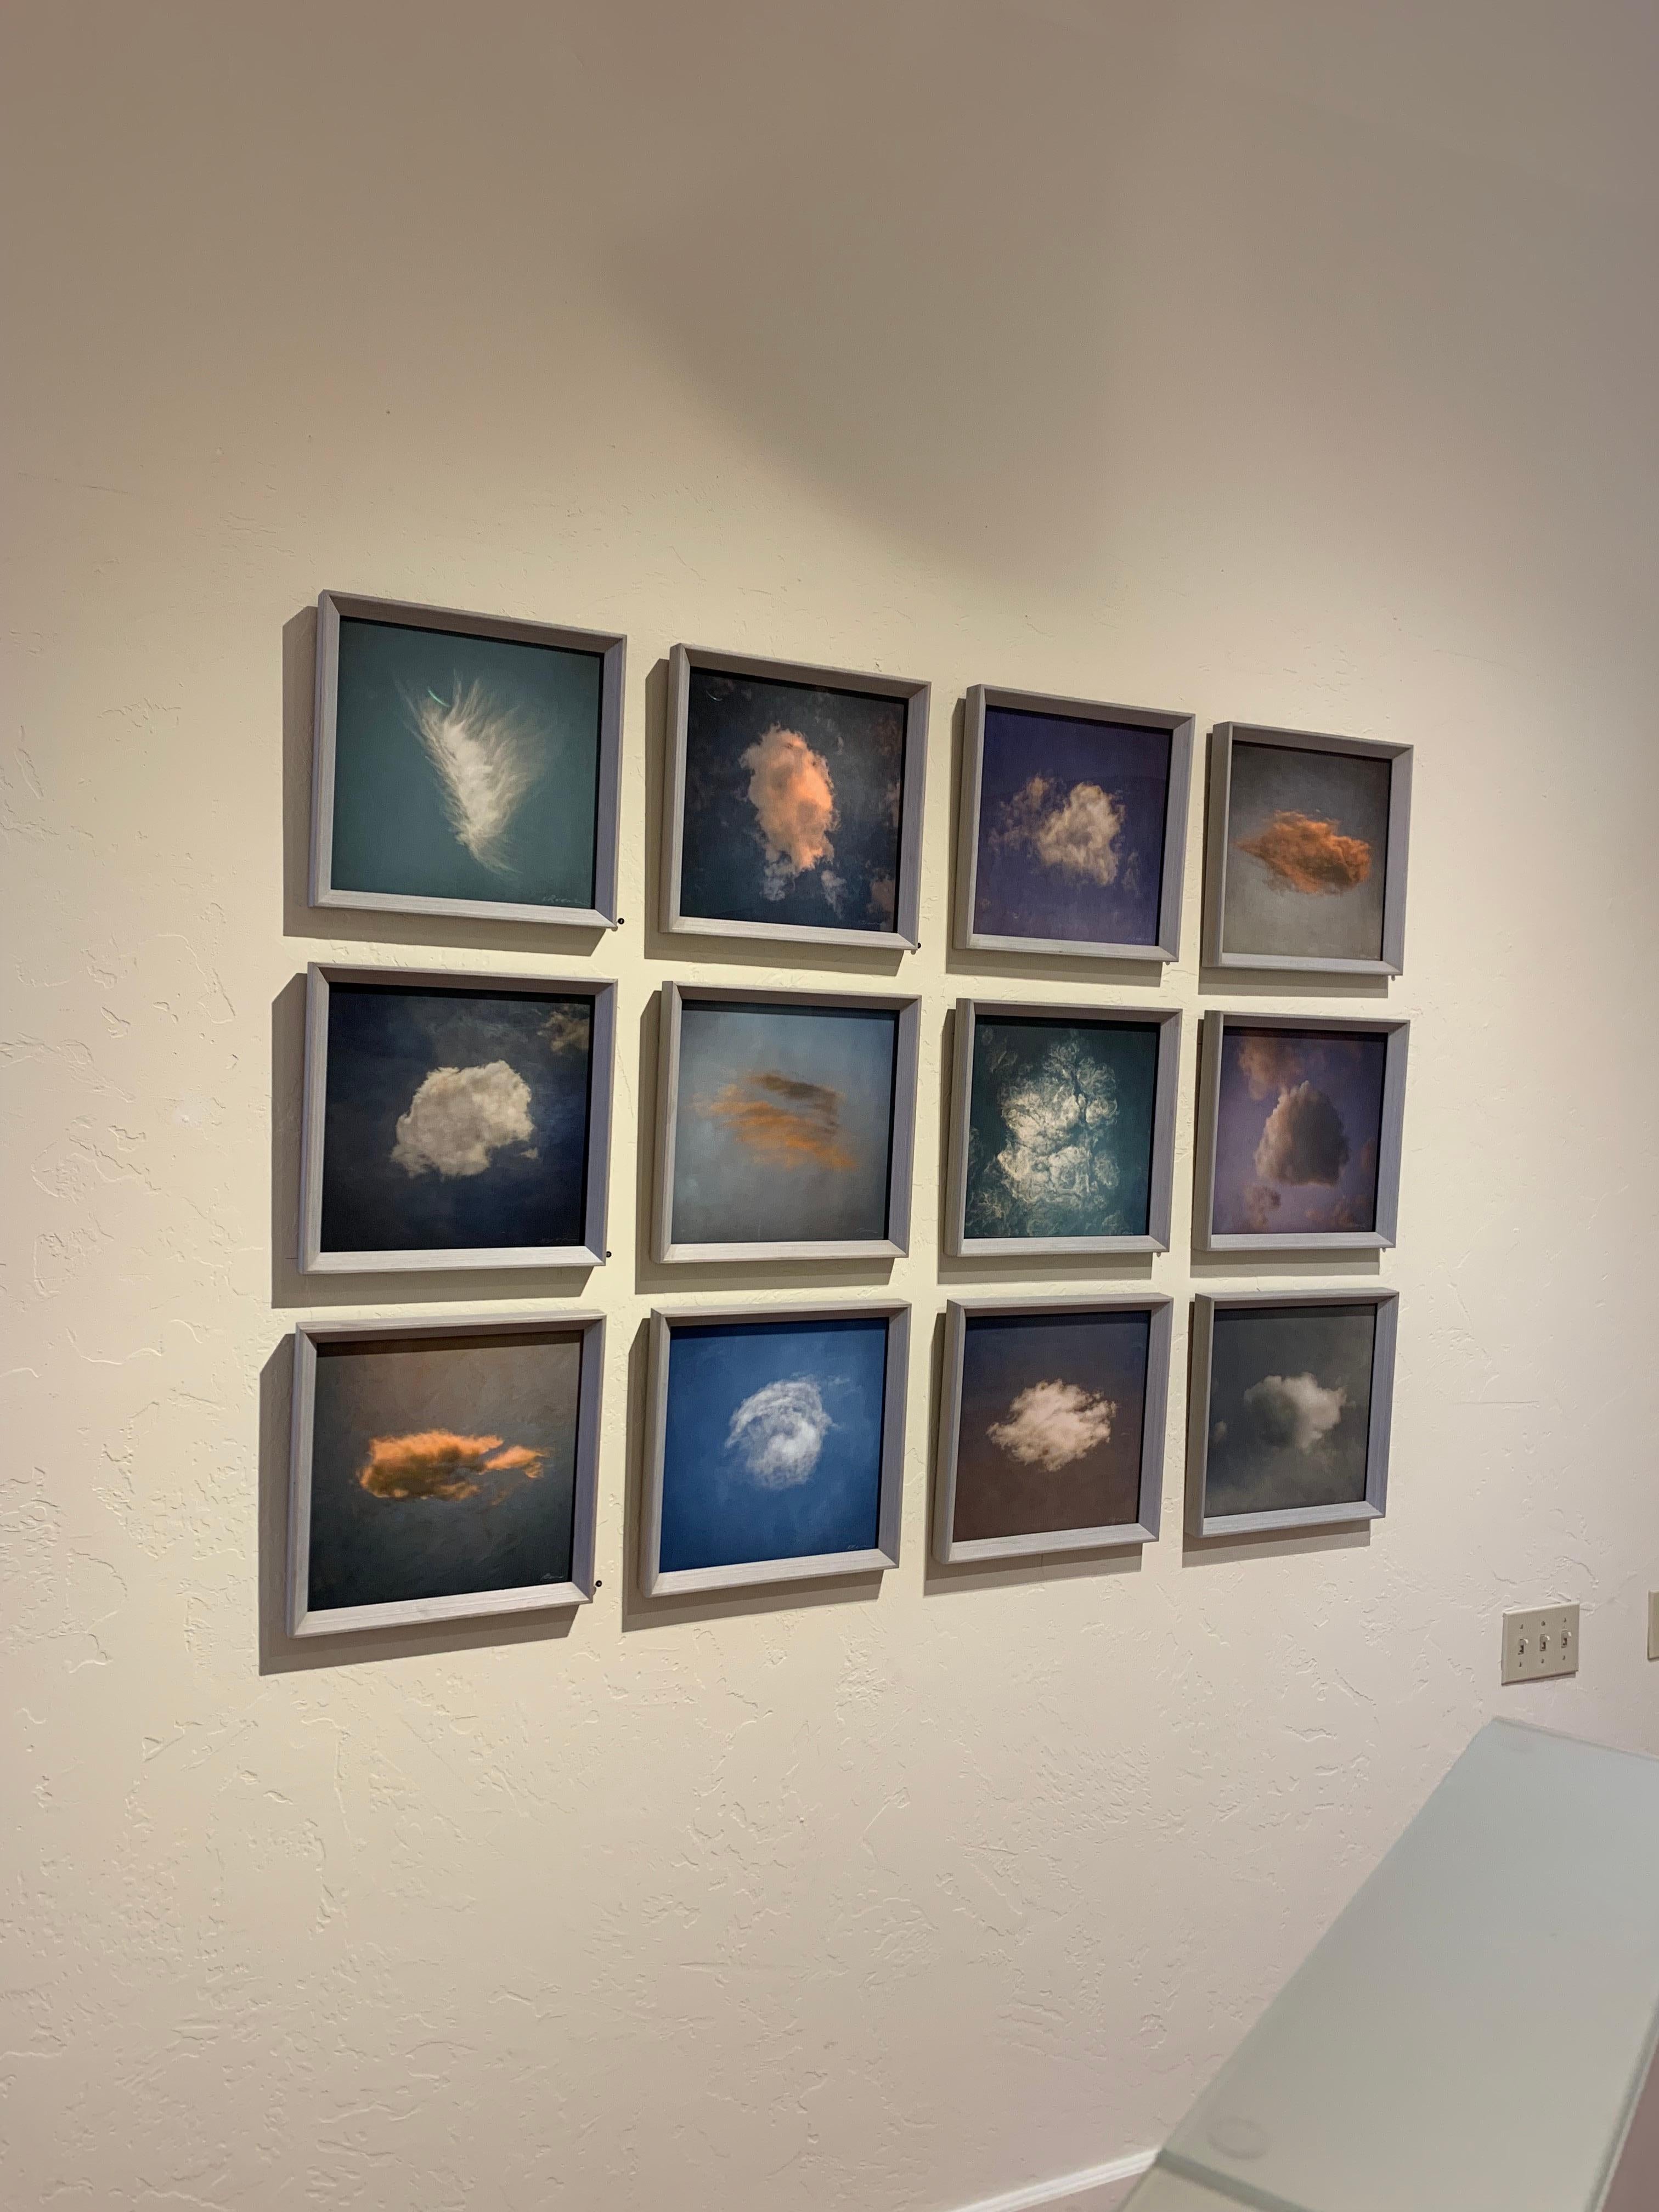 Twelve Clouds, Softly, Slowly (I) - Photograph by Kate Breakey